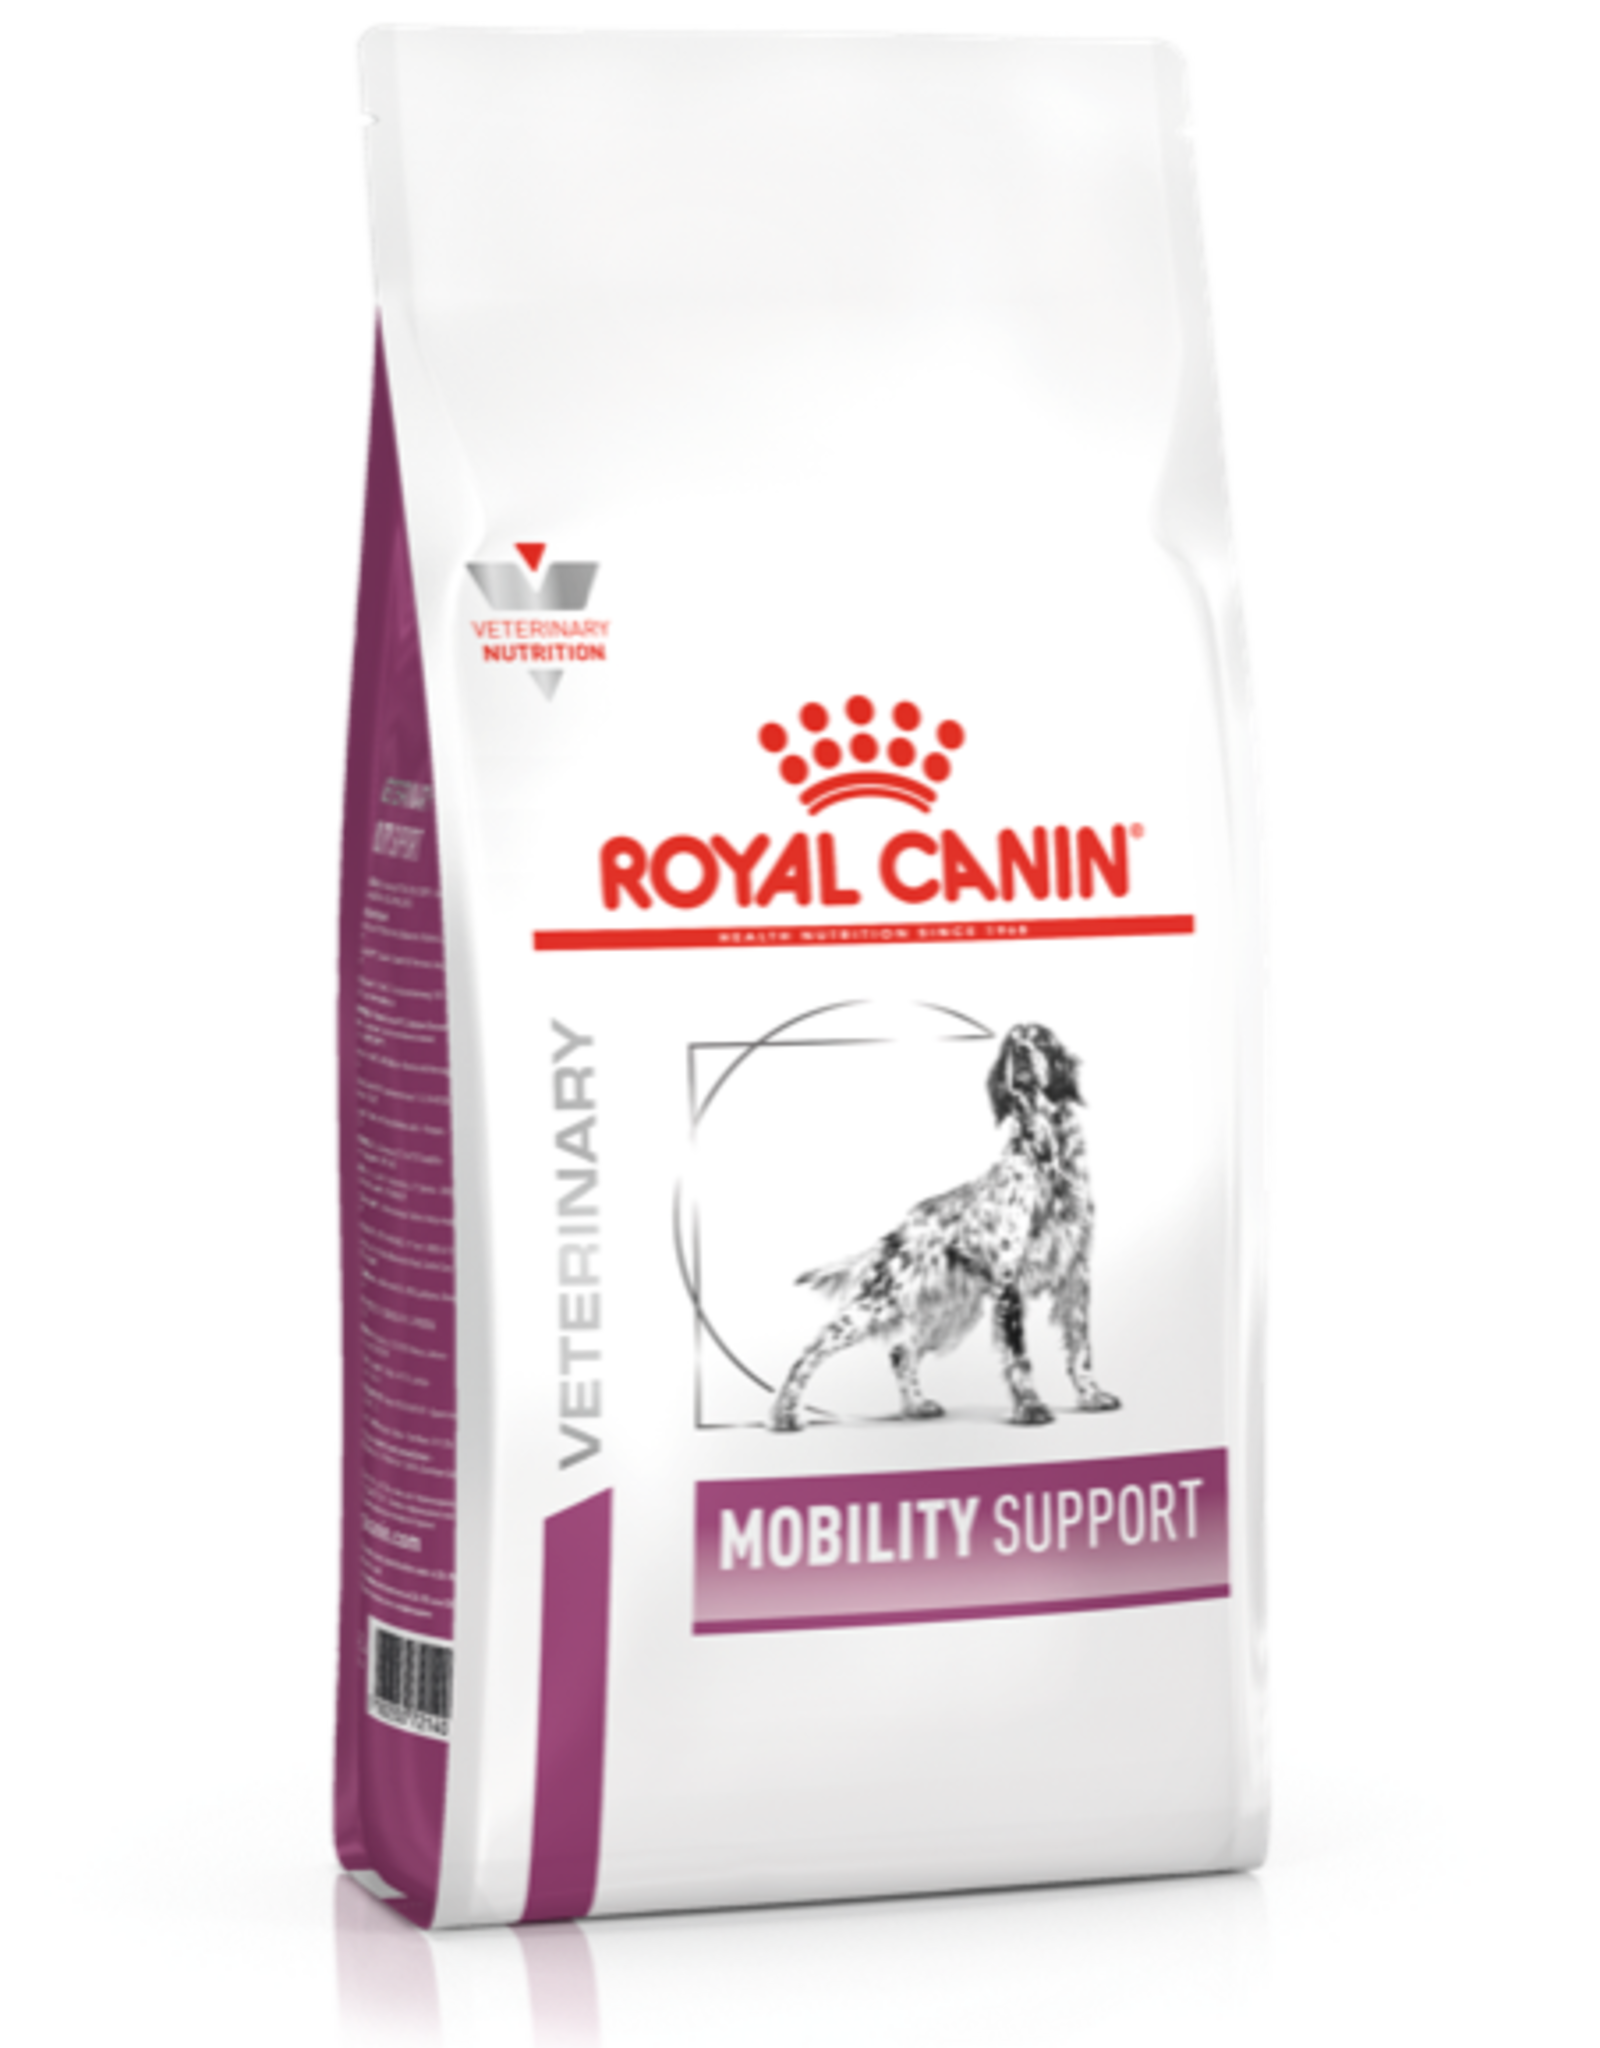 Royal Canin Royal Canin Vdiet Hund Mobility Support 12kg